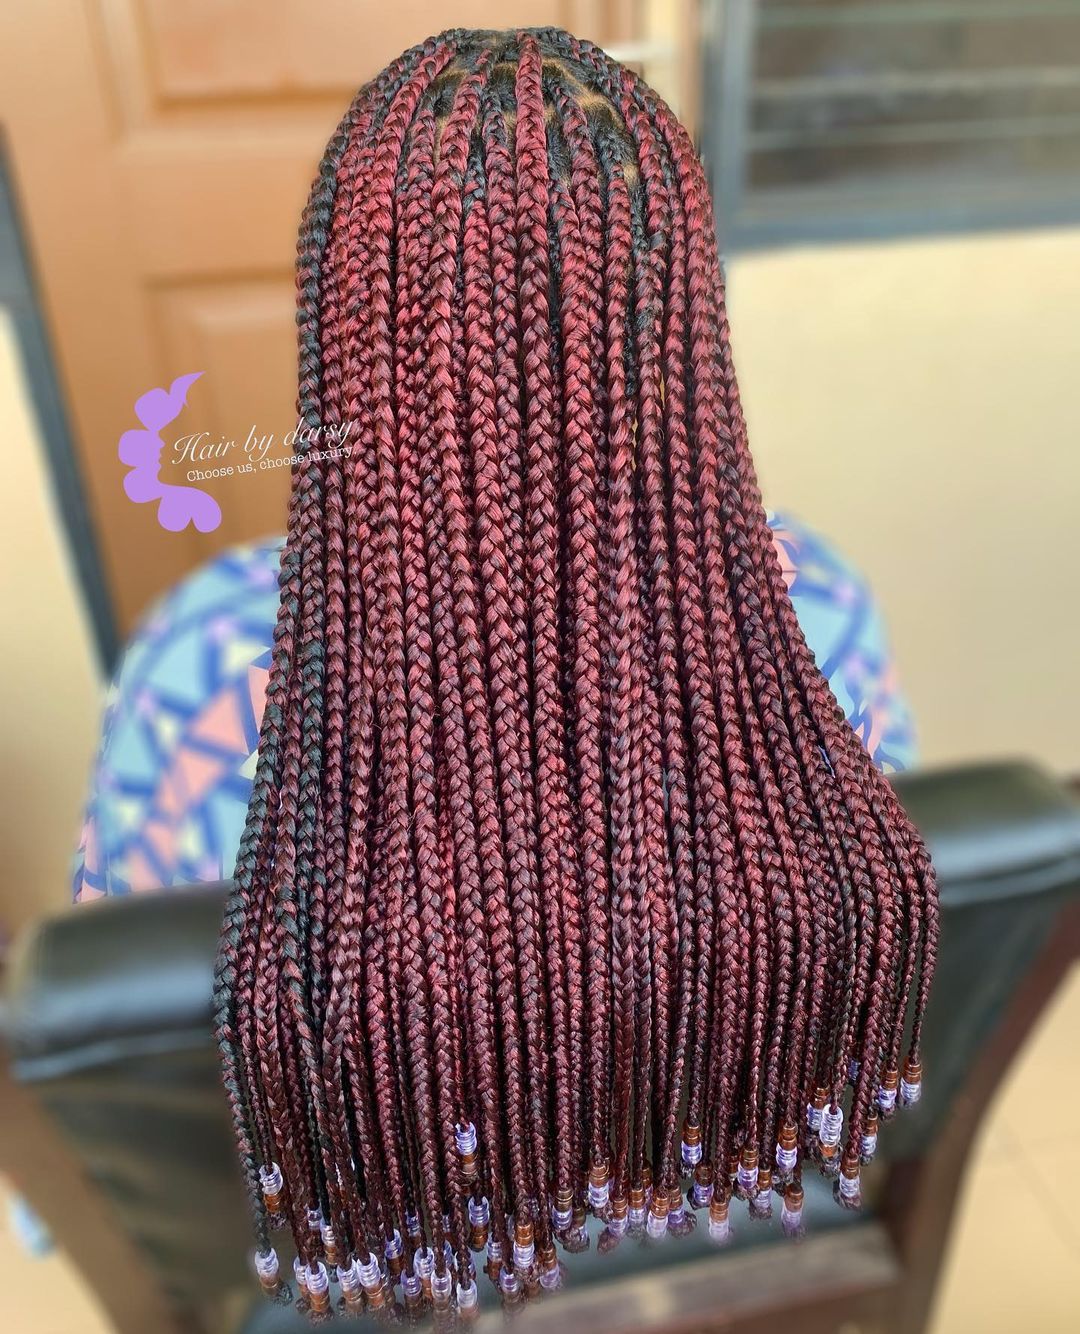 42. Long Medium Burgundy Knotless Braids With Color Beads